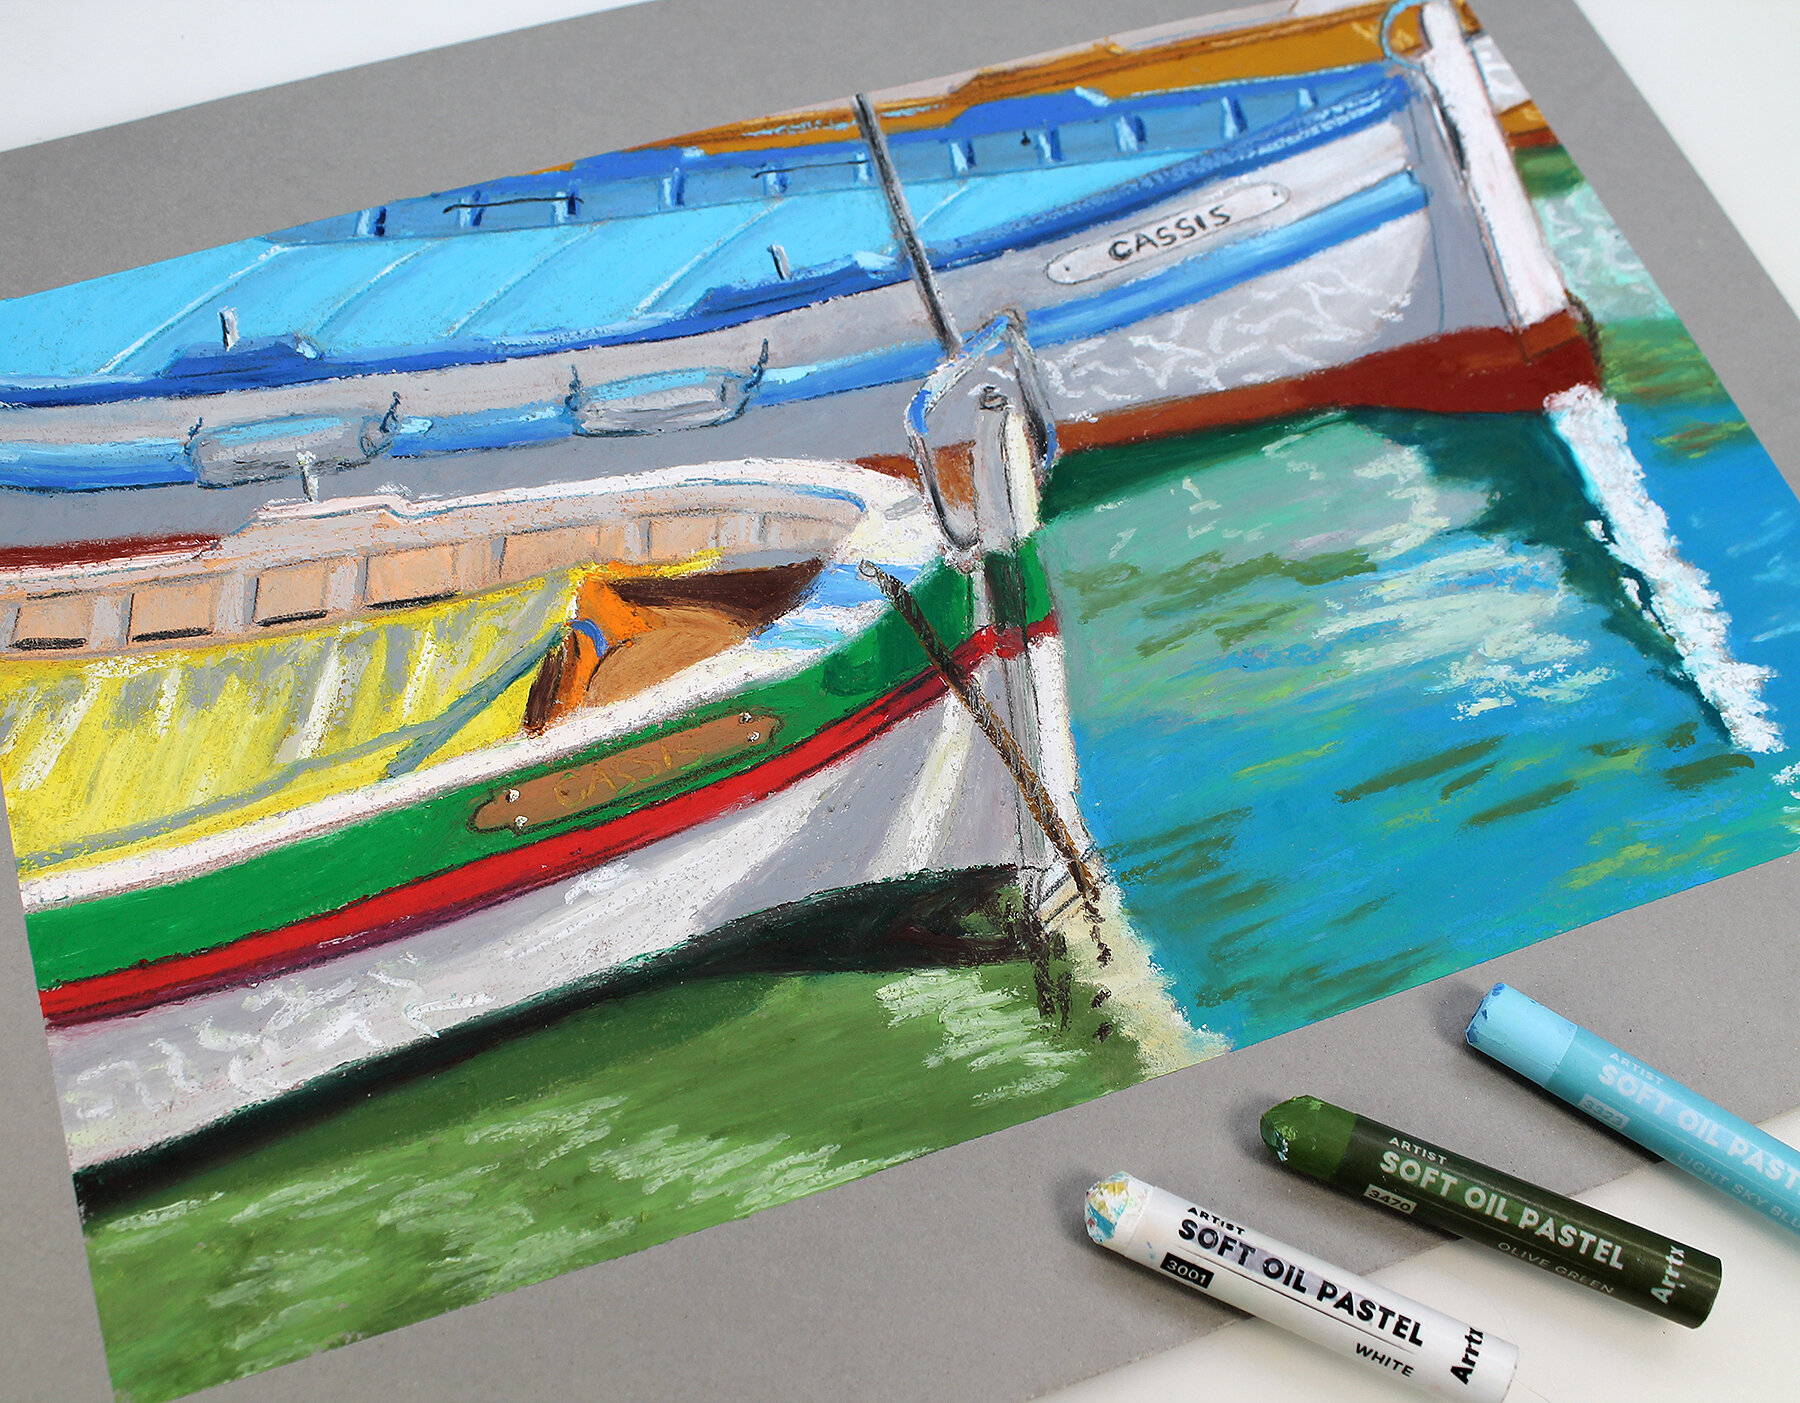 🛥Still using the Canson sand grain paper, but in the grey tone this time, I decided to try and get a more realistic style by blending most of my layers. I used cotton swabs to do so. Because of the thick consistency of the pastels, it was tricky at 